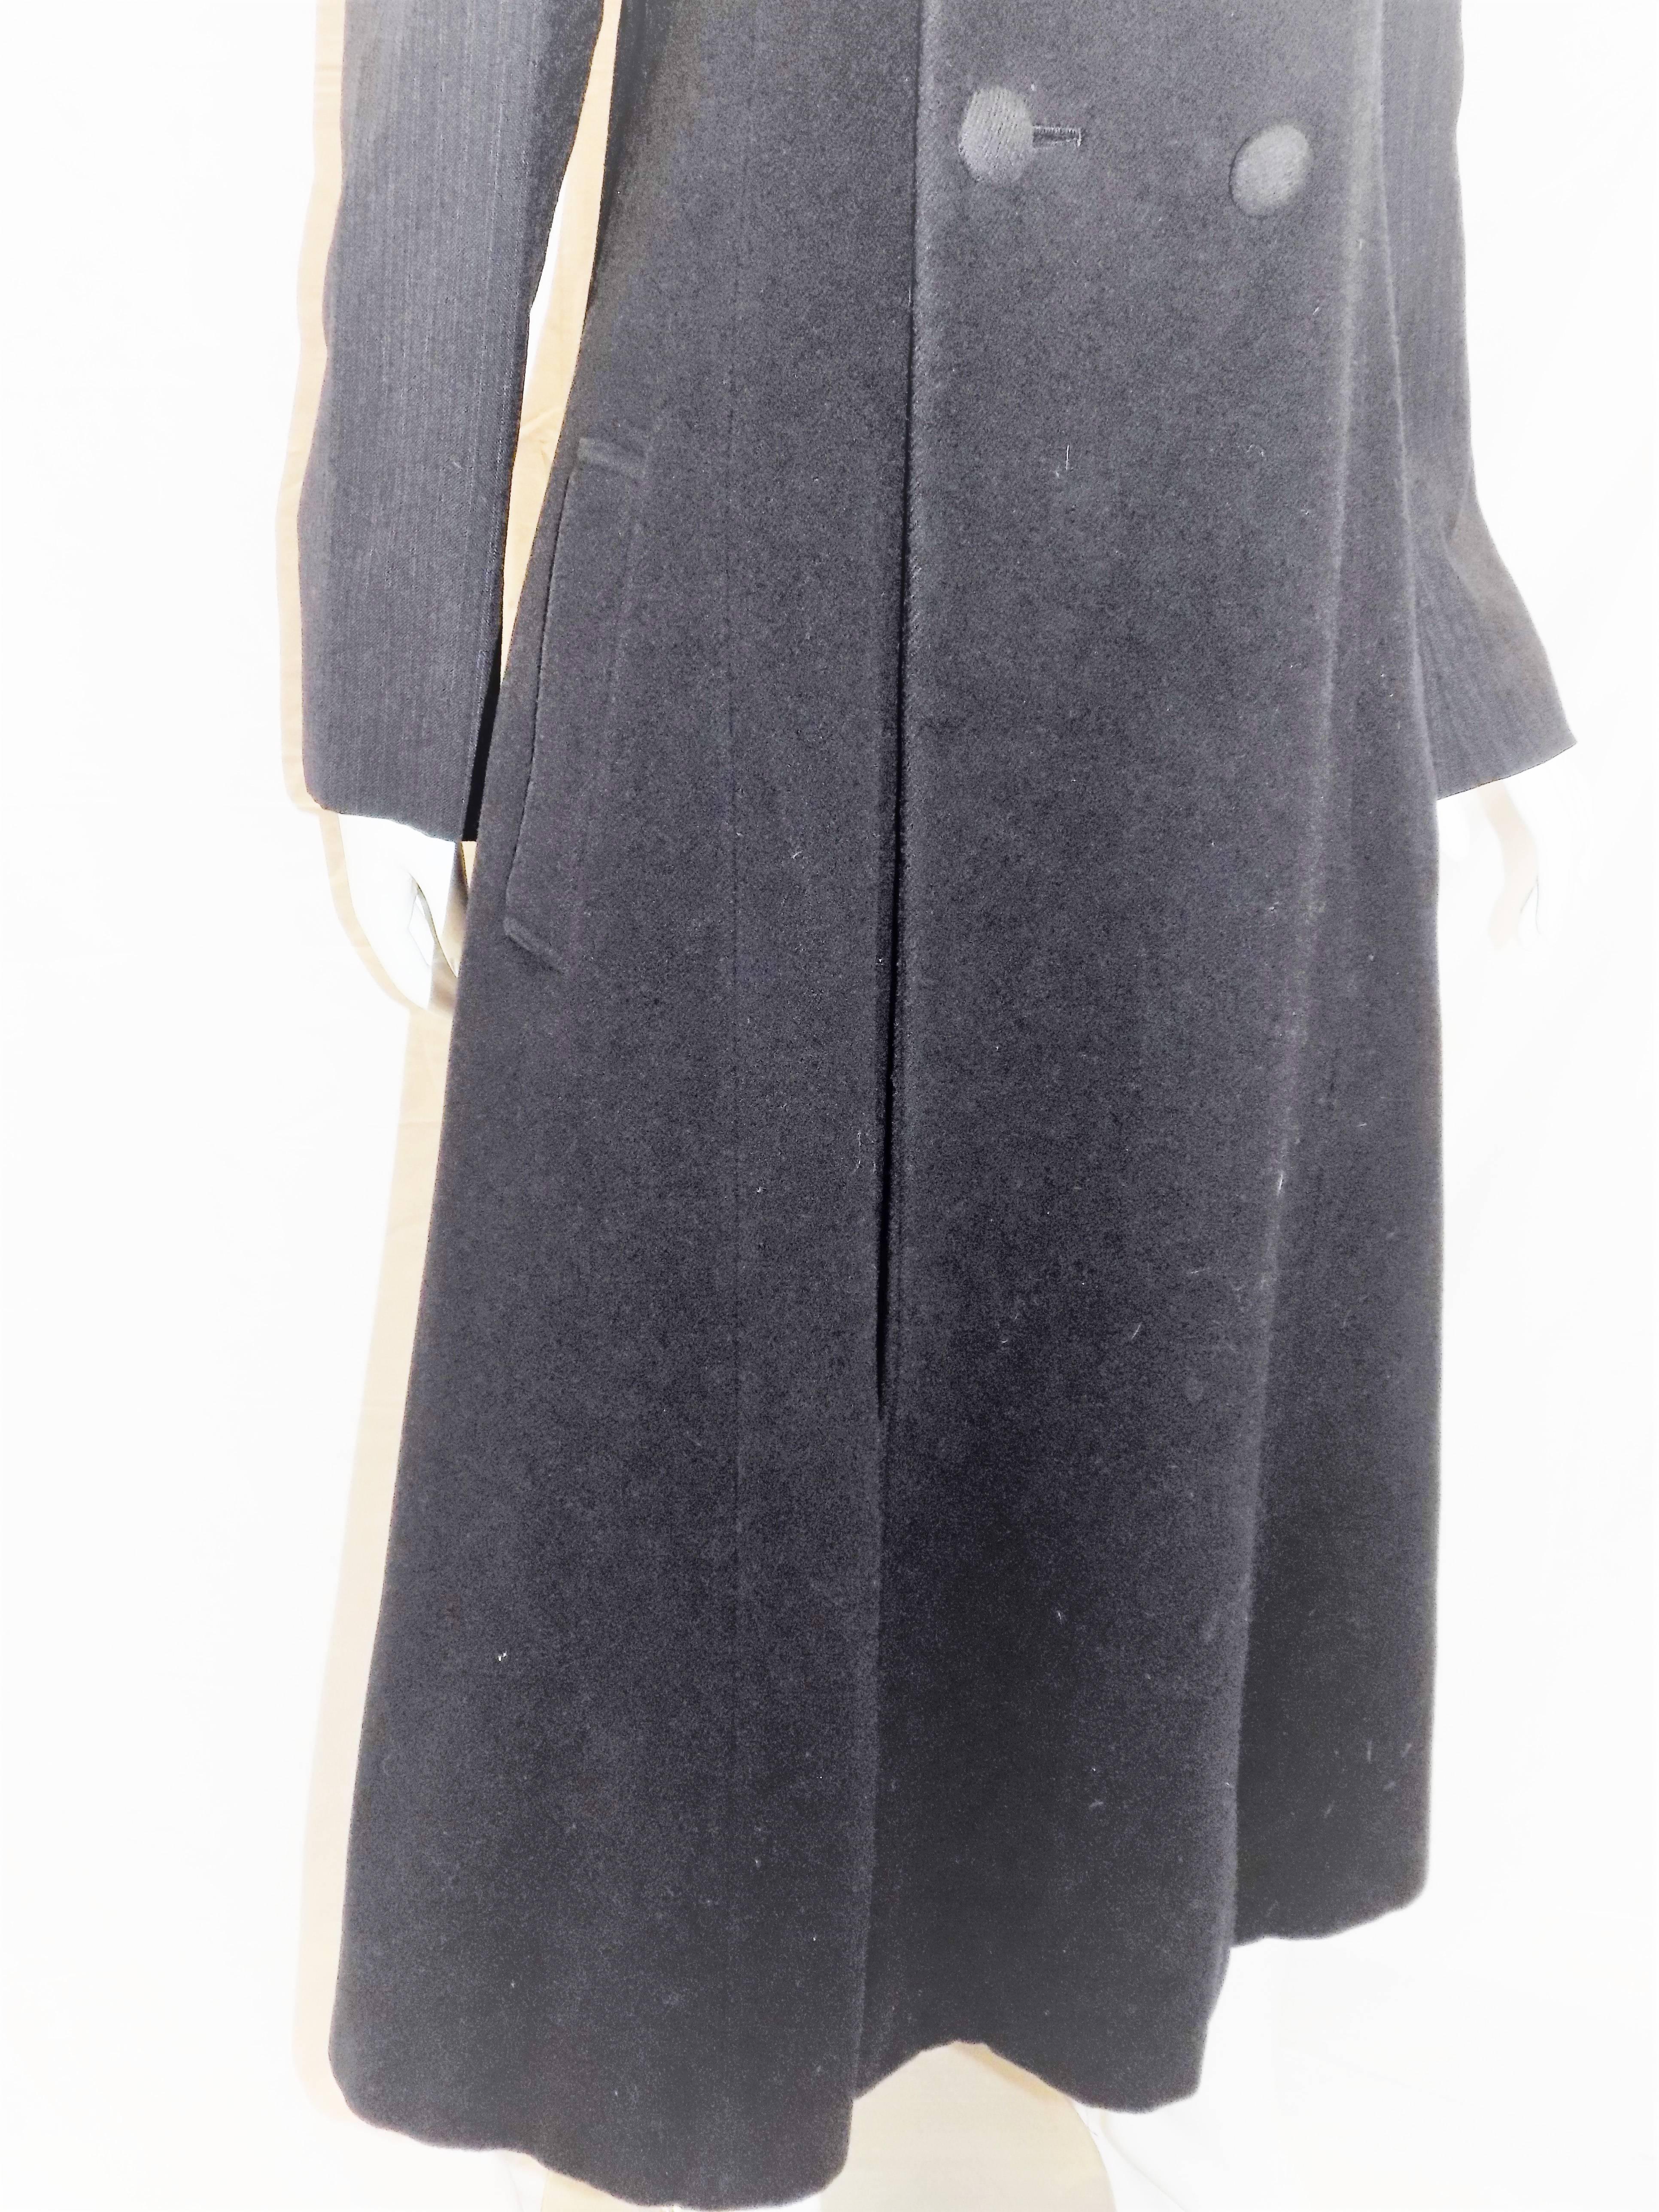 Comme de Garcon Vintage   full length Coat In Excellent Condition For Sale In New York, NY